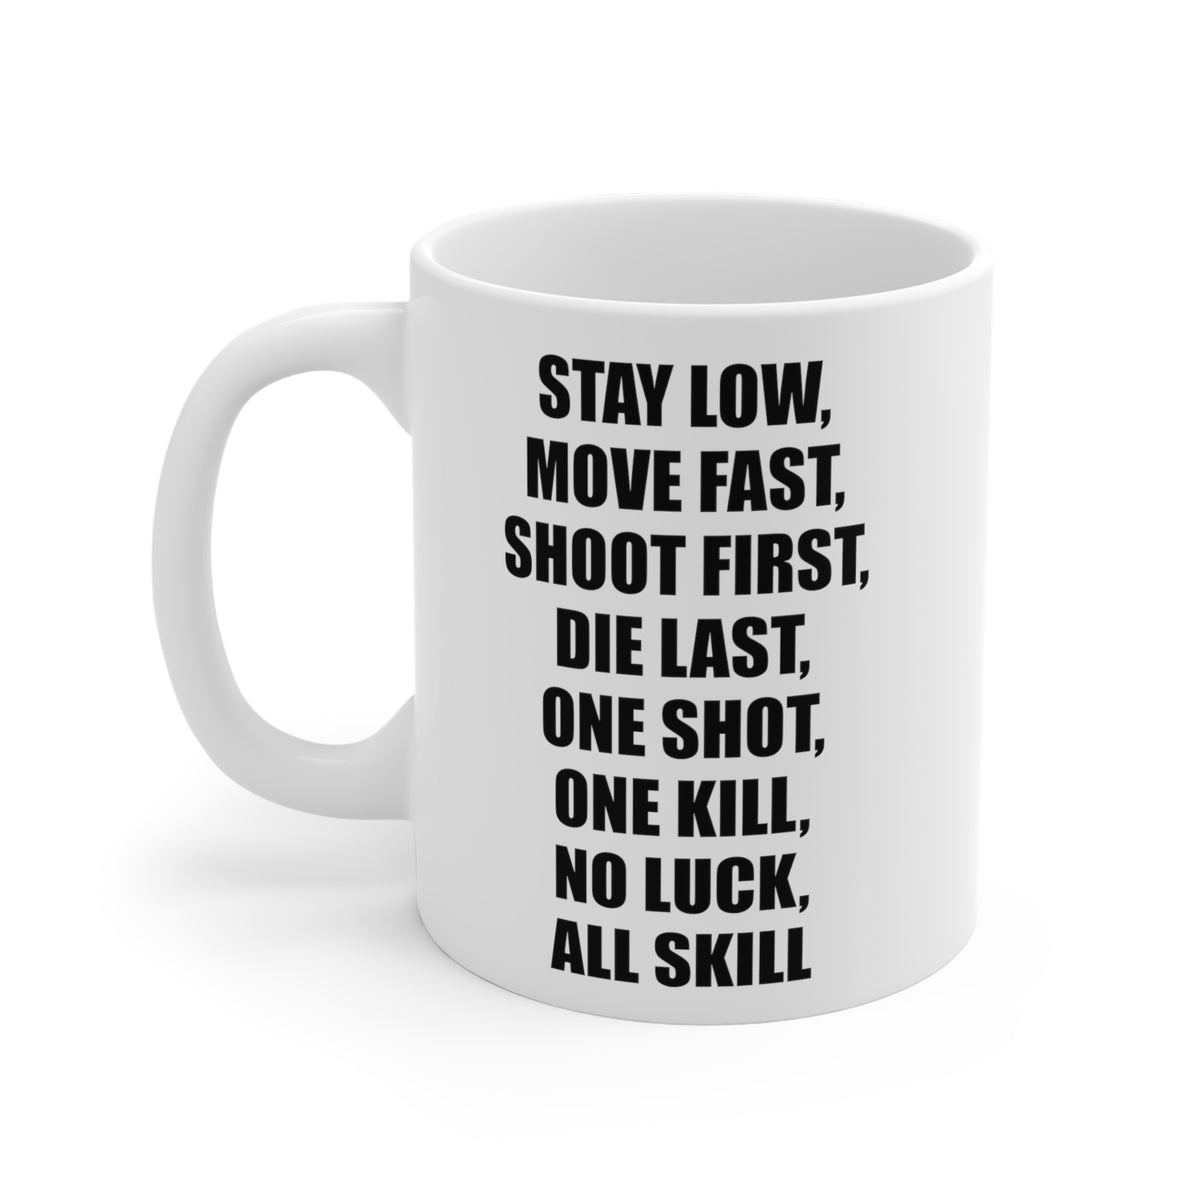 Coffee Mug - Stay Low, Move Fast, Shoot First, Die Last, One Shot, One Kill, No Luck, All Skill Tea Cup For Army Veteran